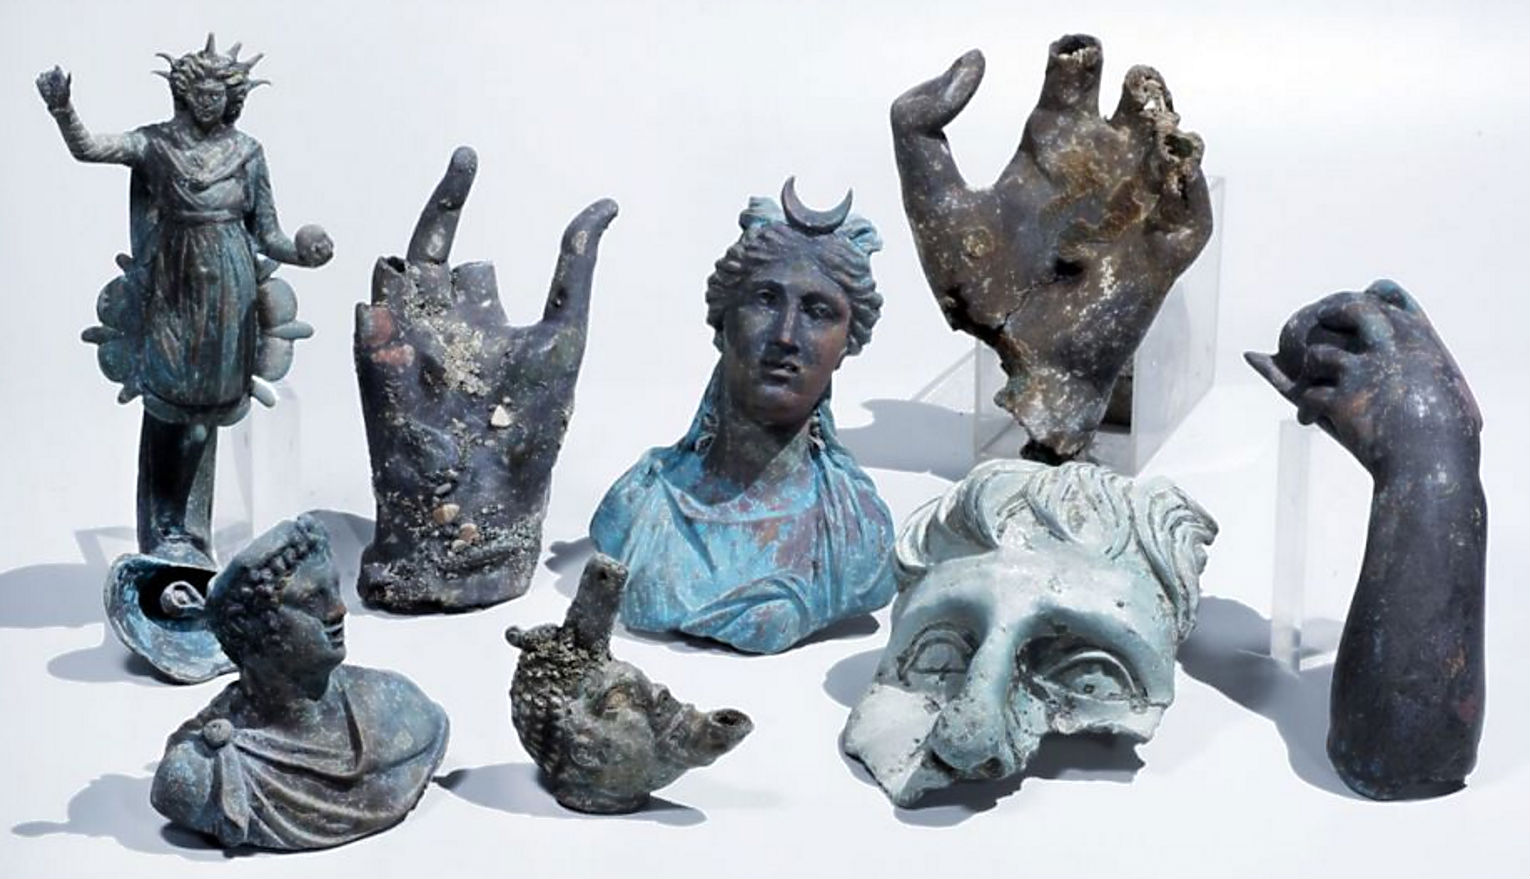 Divers Just Uncovered Incredible Roman Treasures From a 1,600-Year-Old Shipwreck